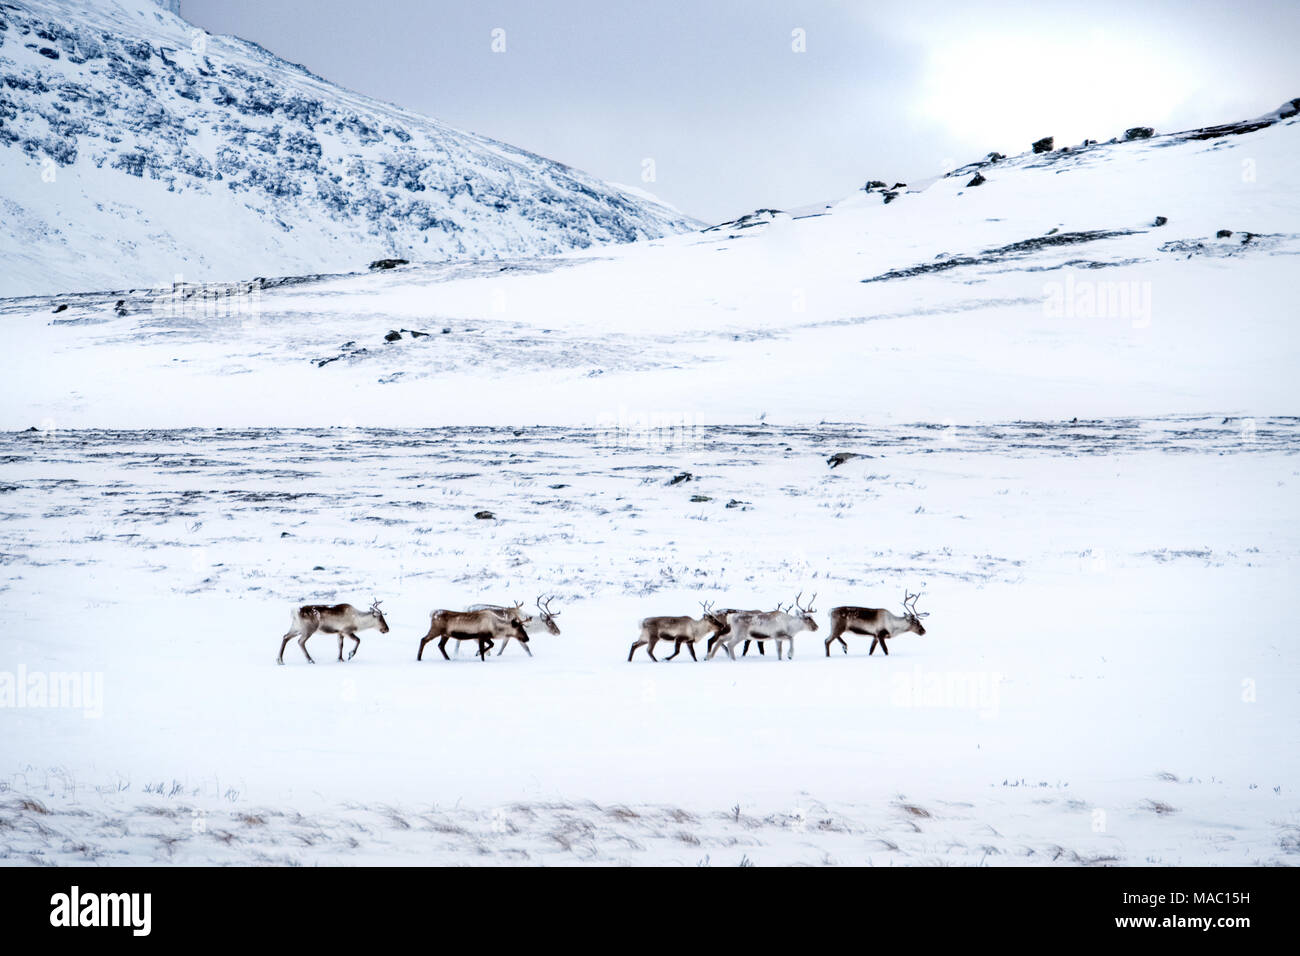 A herd of Reindeer in the winter mountains of the Padjelanta National Park, Sweden Stock Photo